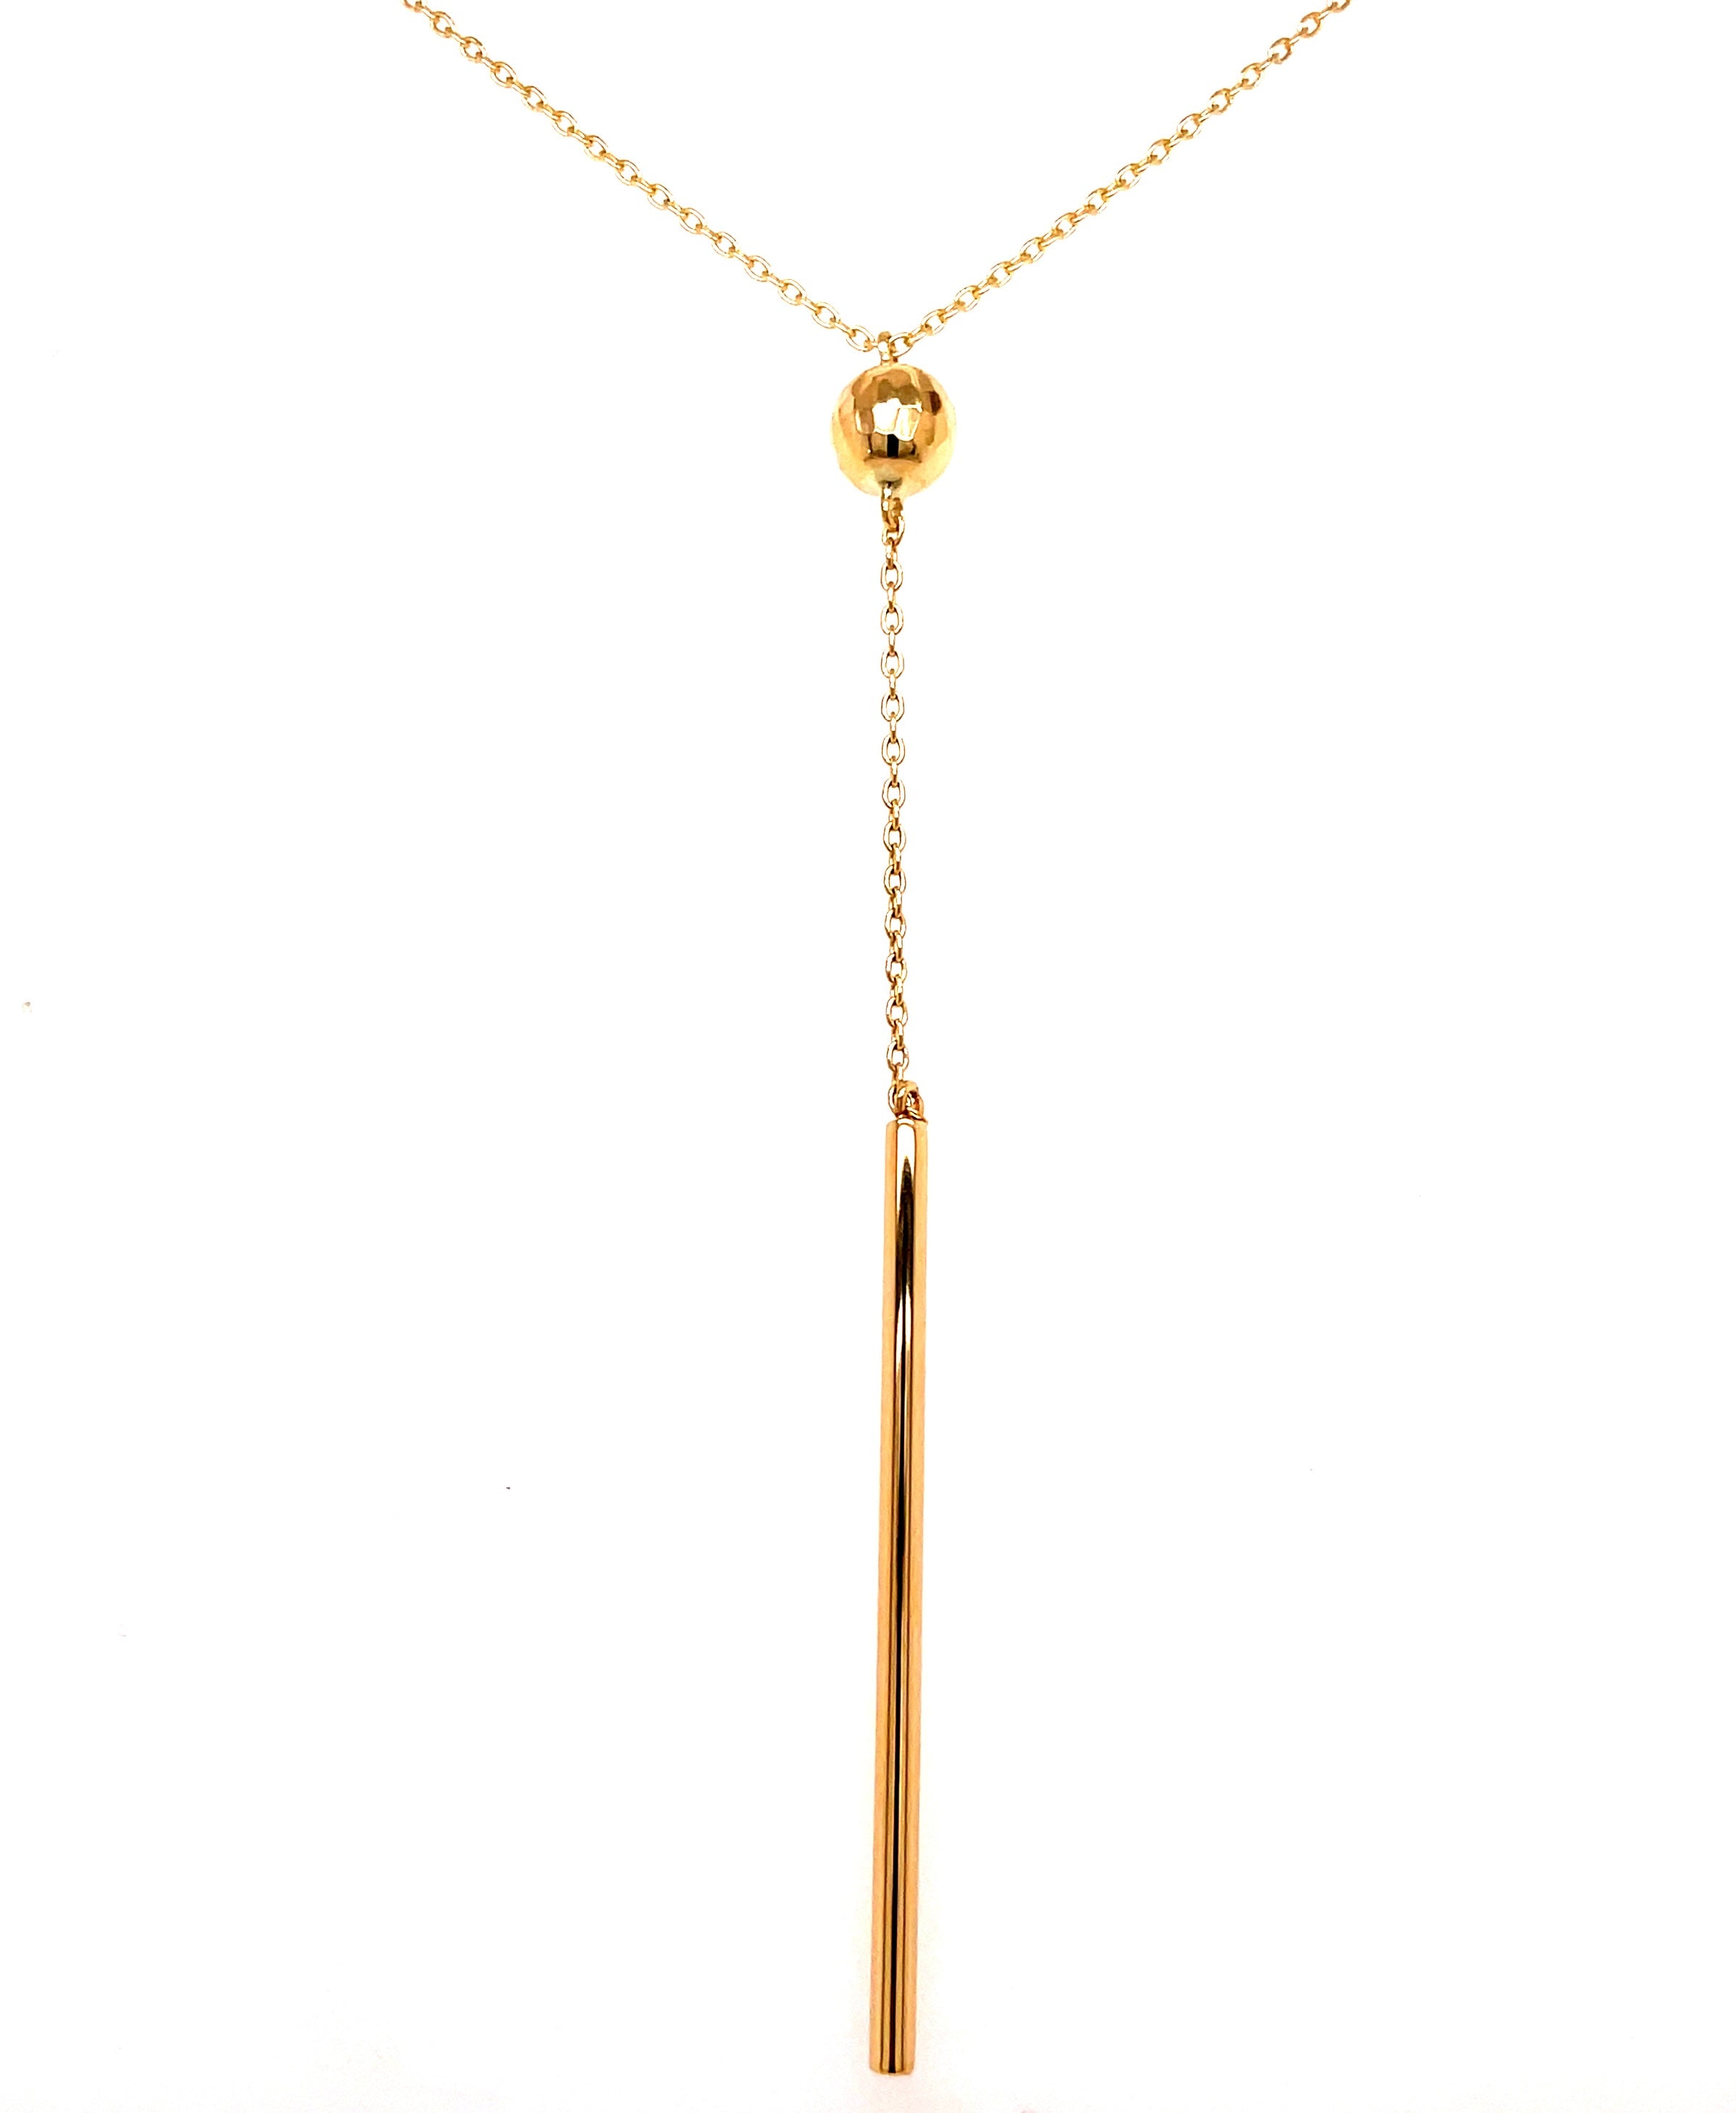 This exquisite 14k yellow gold necklace is crafted with a 1.1 mm Italian-made cable chain and a Diamond cut gold bead. A perfect length of 20", it features a sizing loop at 18" and a 3" lariat drop for a look that exudes sophistication and luxury. A solid drop bar of 1.5" inches promises a timeless addition to any jewelry collection.